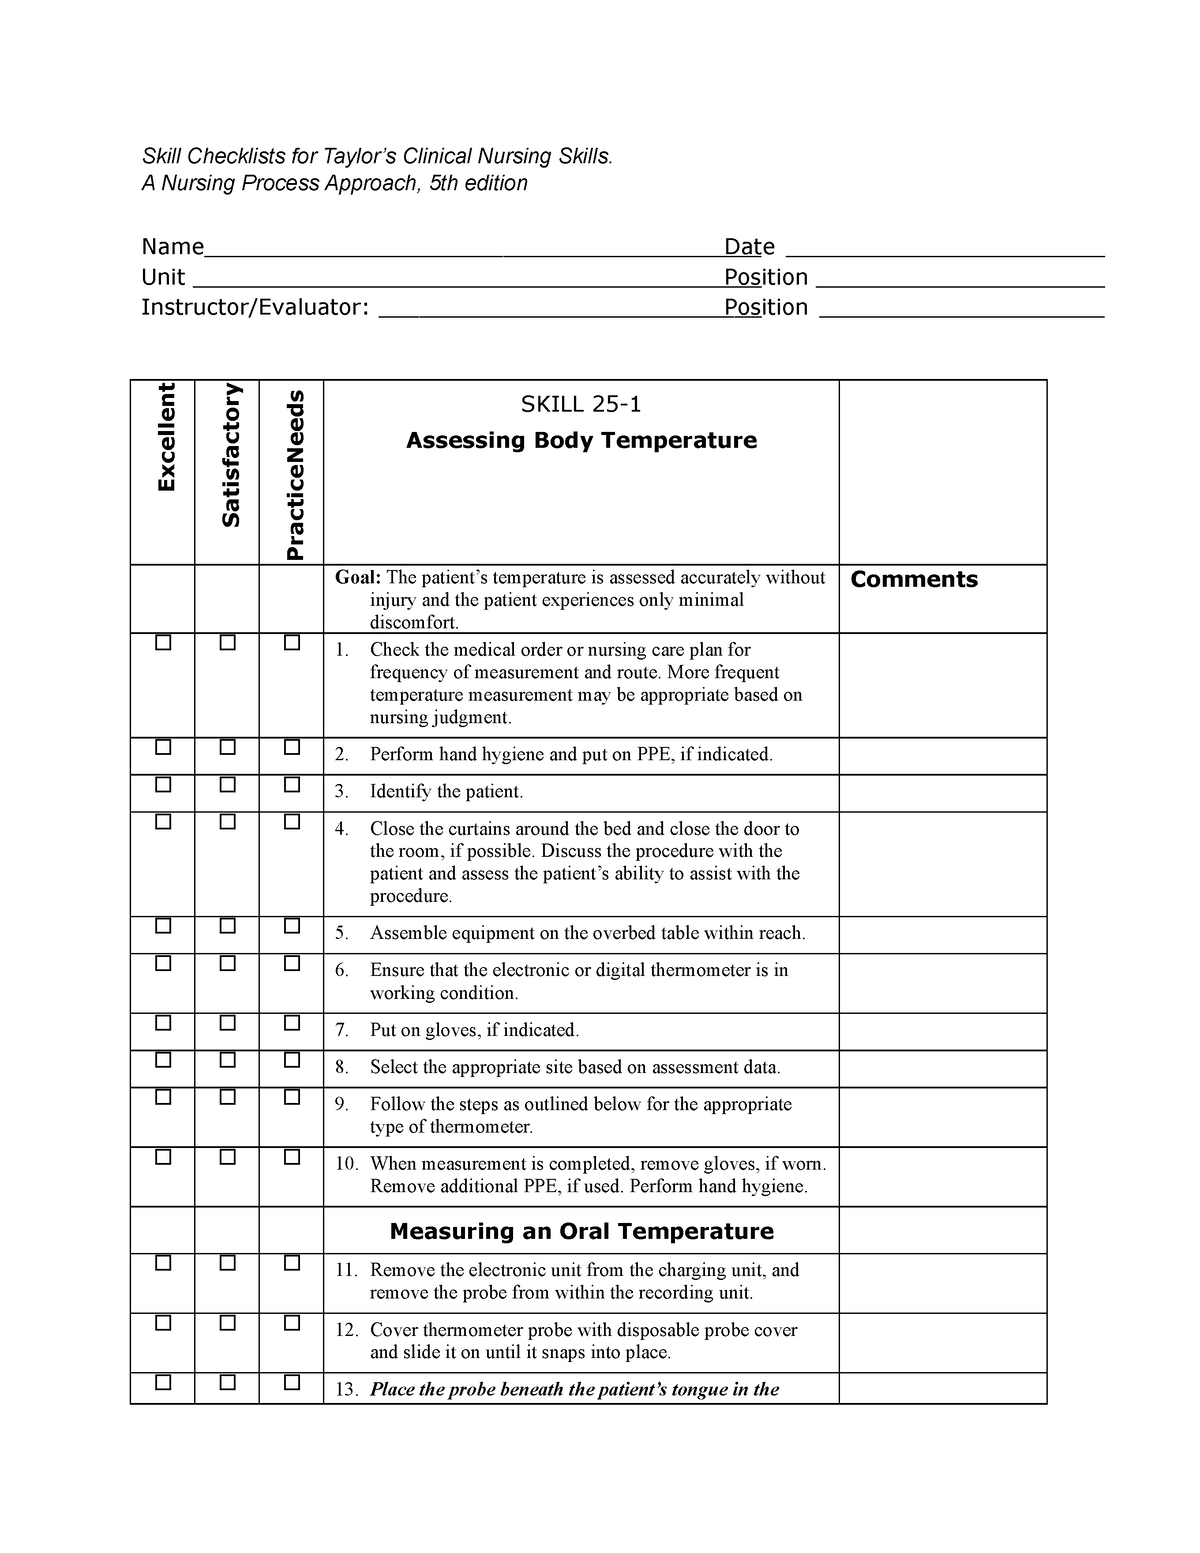 Skill Checklist For Assessing Body Temperature Skill Checklists For Taylors Clinical Nursing 6314